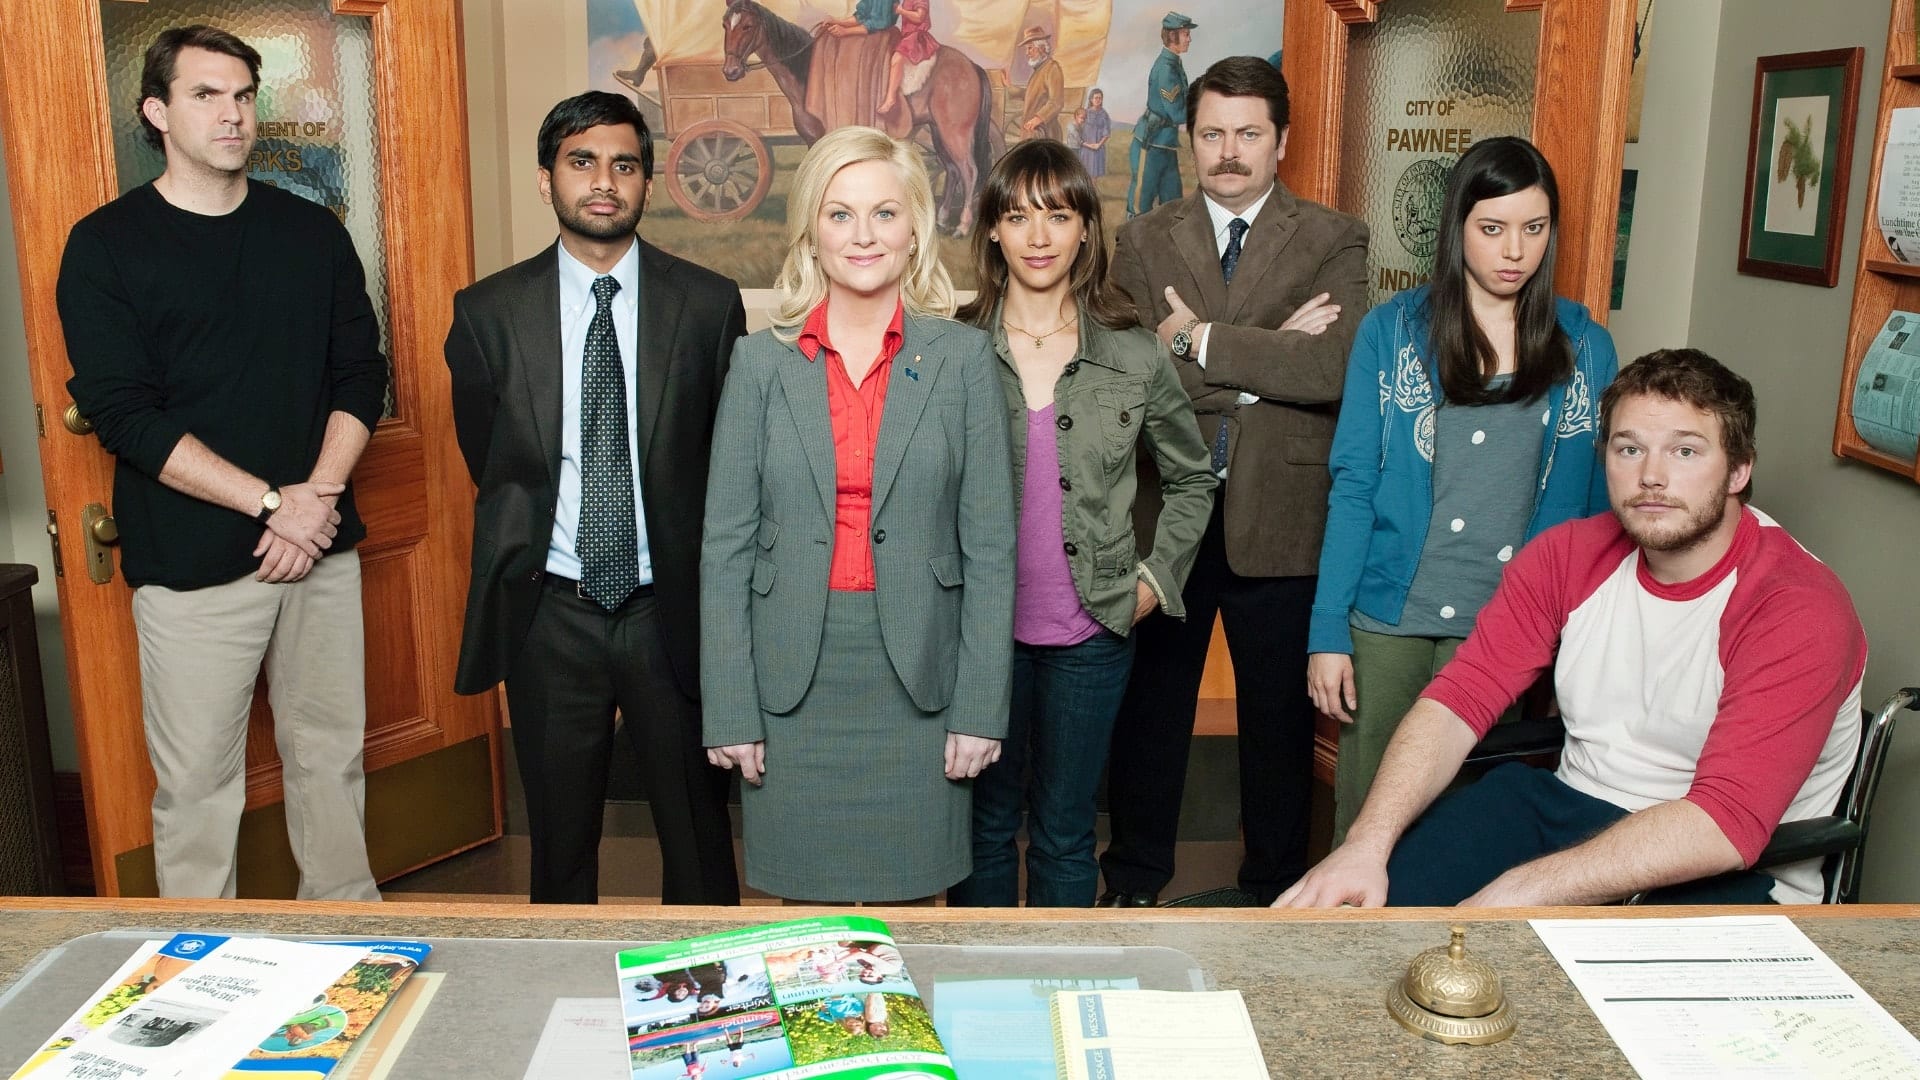 watch parks and rec online season 6